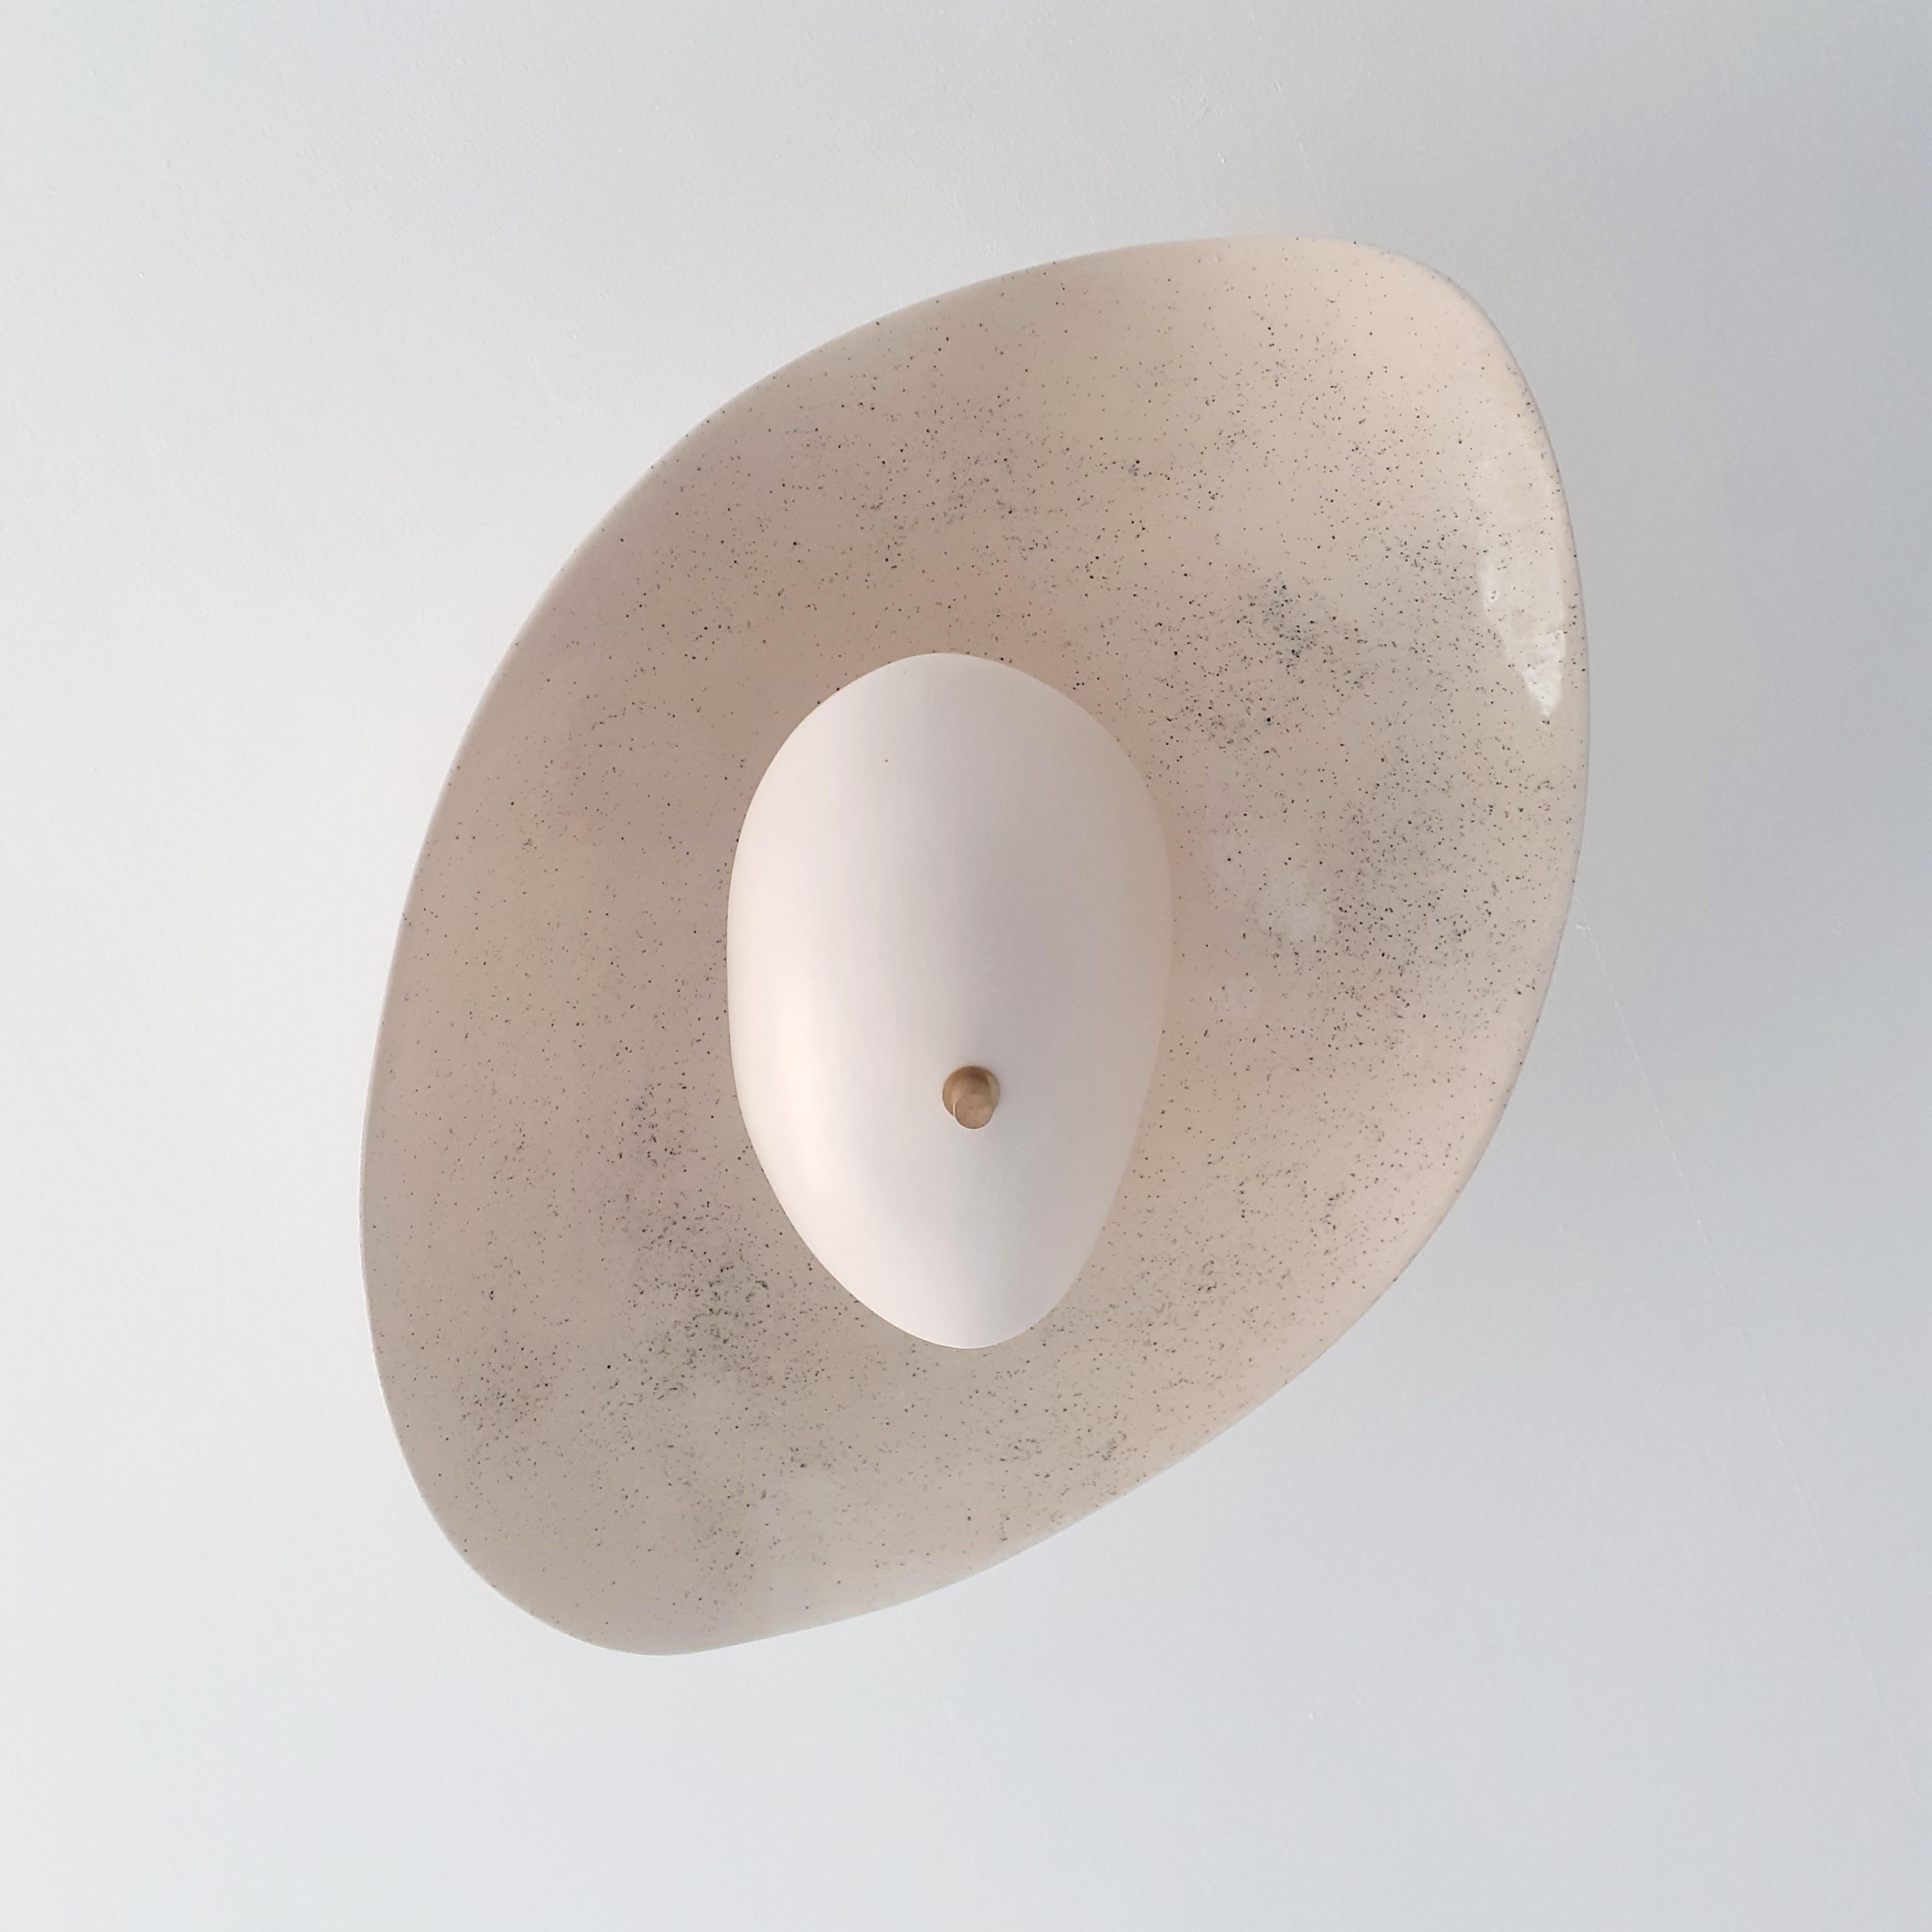 Ceramic ceiling light with airy design.
Brass structure and enameled ceramic handmade in Parisian worksop by Elsa Foulon Studio.
Custom-made on request.